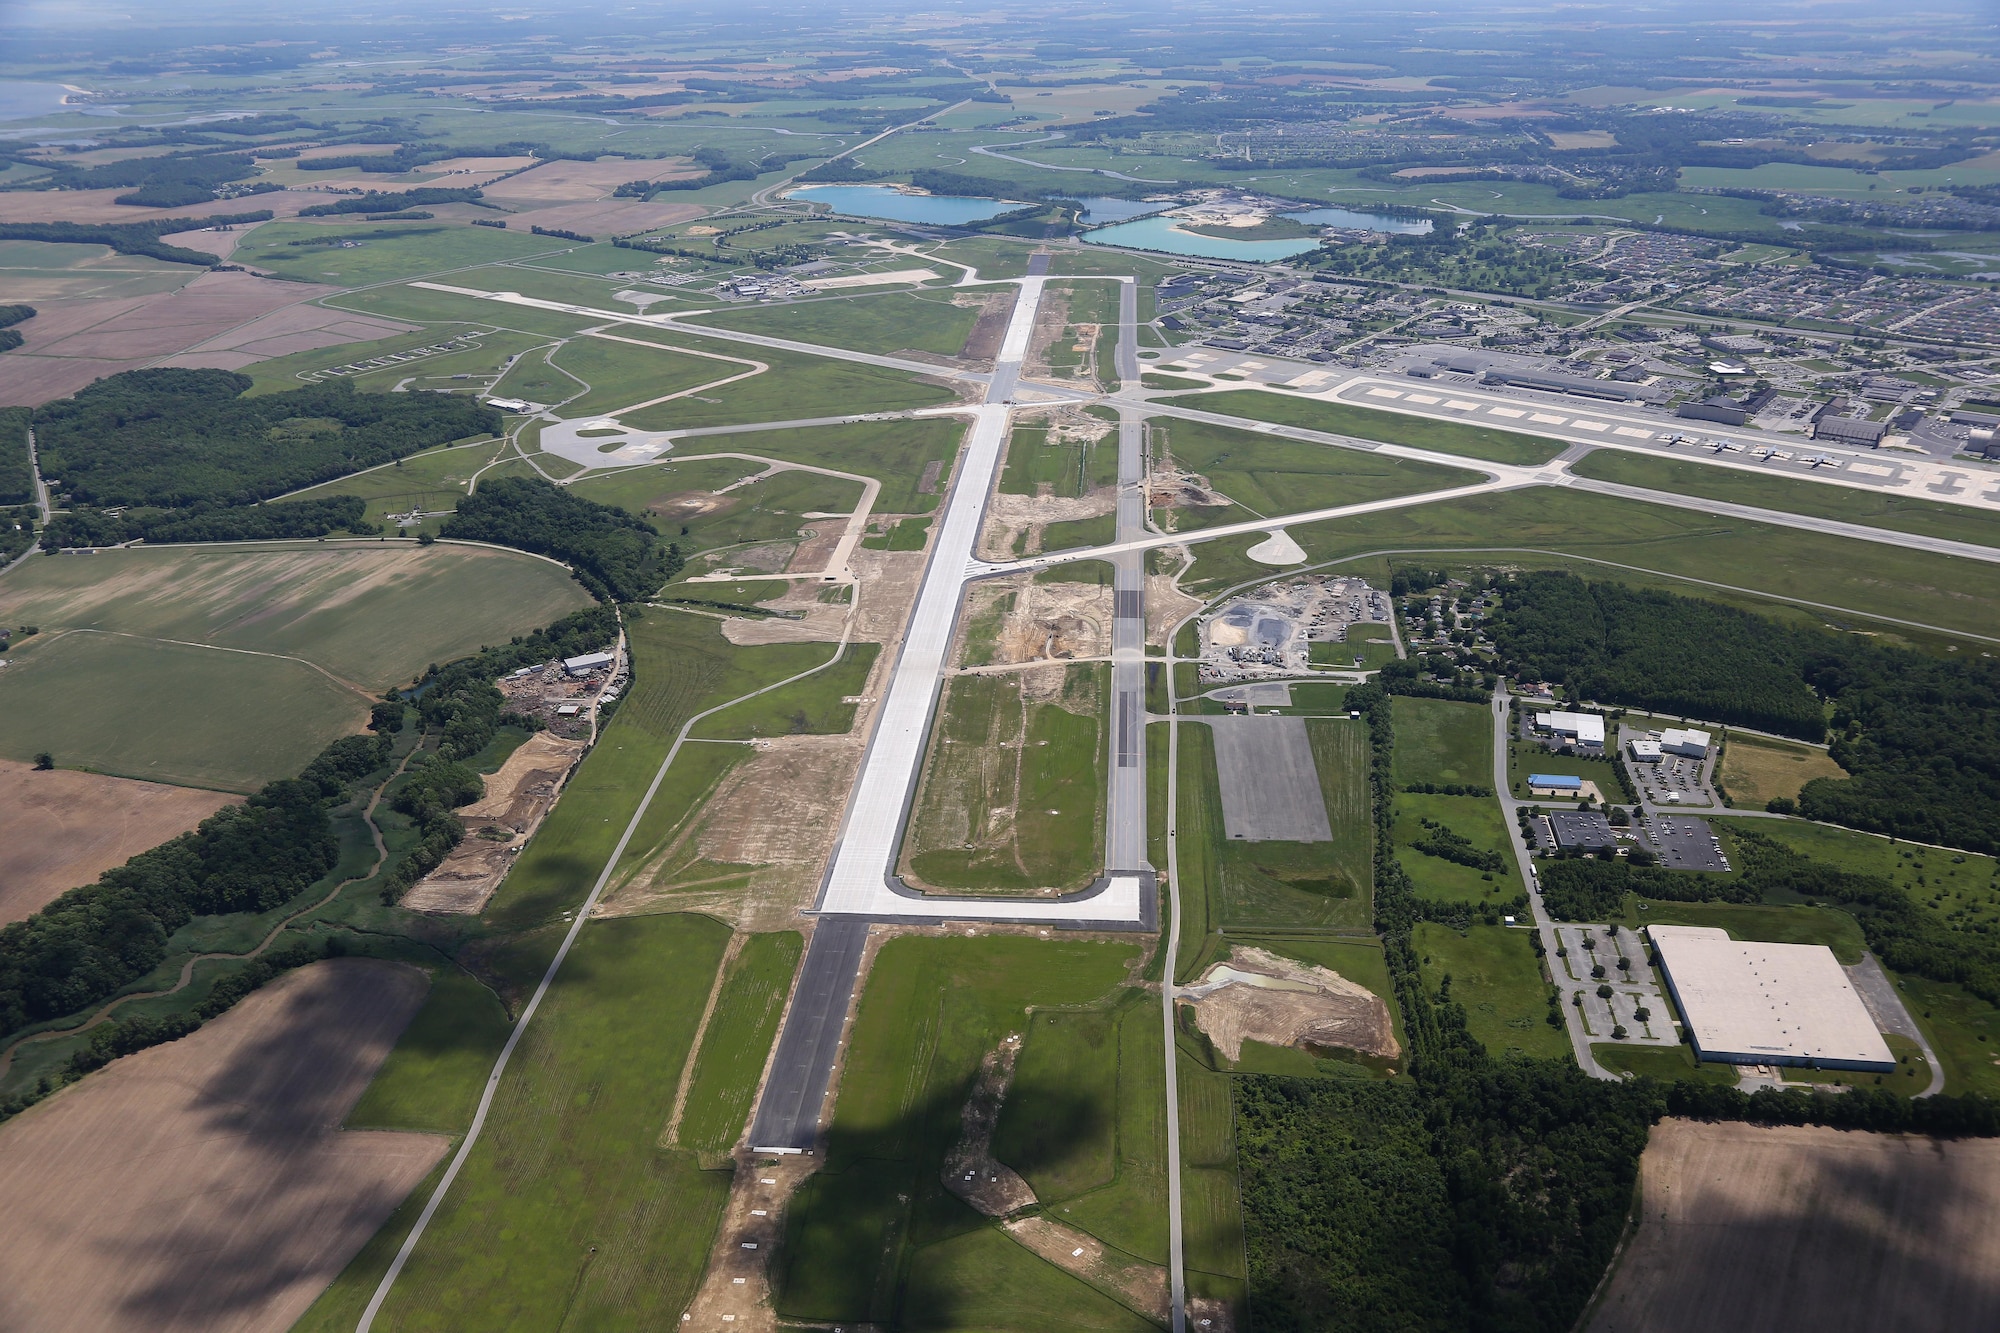 Runway 01-19 at Dover AFB, Delaware, is 9,600 feet long and 200 feet wide. The renovation, which lasted almost two years, includes 220,000 cubic yards of concrete; 1,040 lighting fixtures; and 209 miles of cable. 